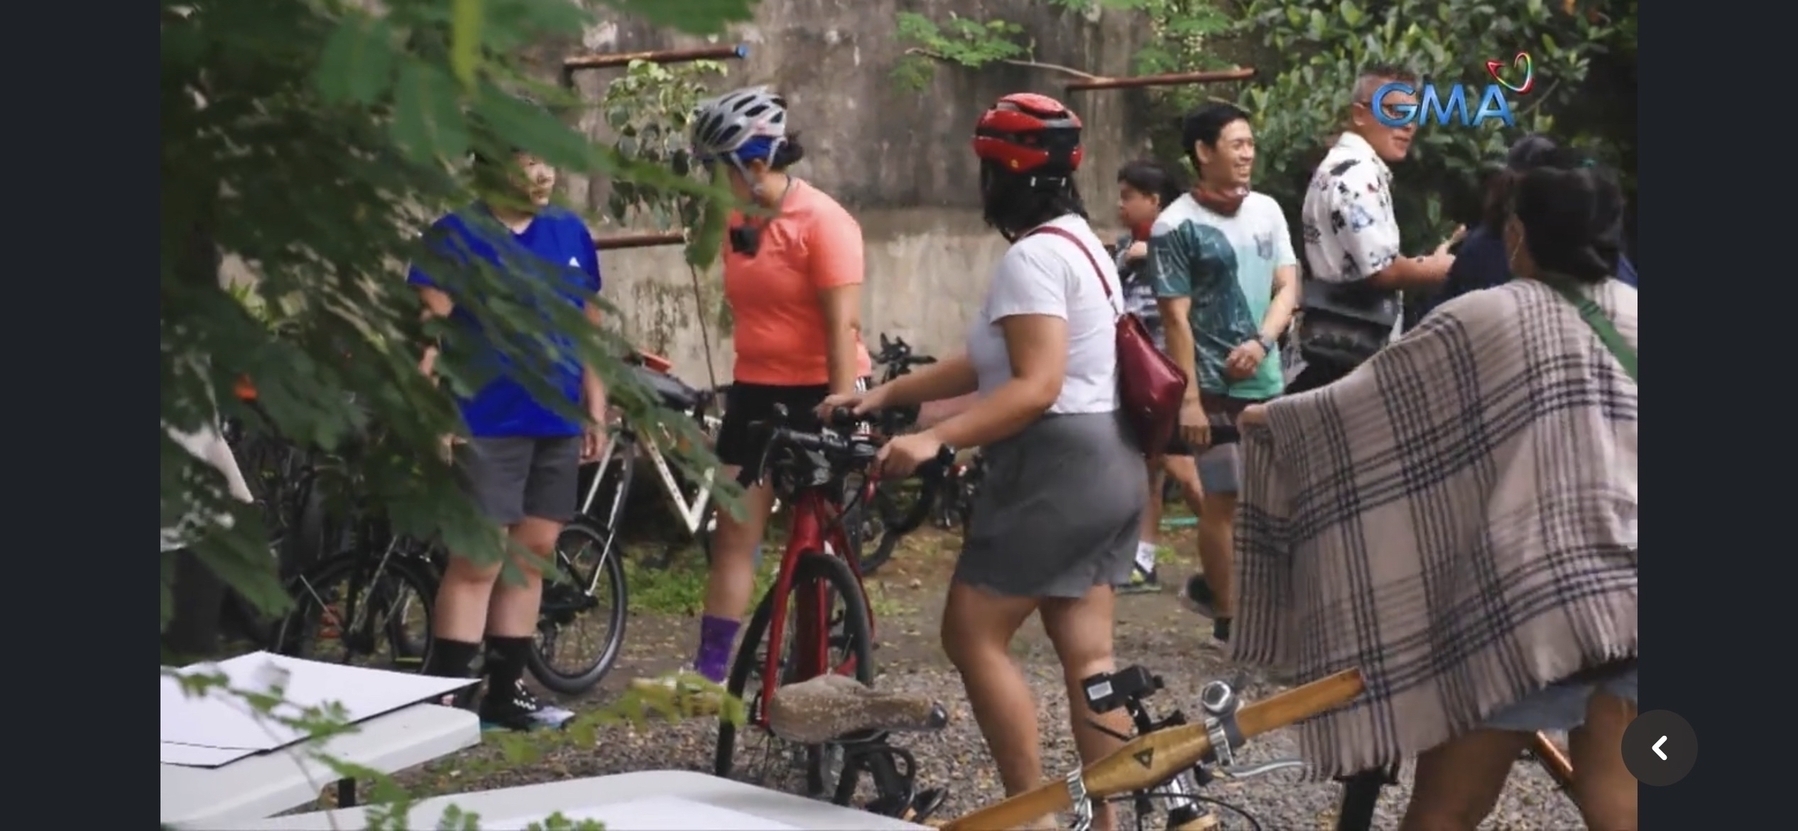 snippet from the I-Witness documentary, entitled Trip to Pasig, where Chi and her other fellow bike commuters are seen arriving at Manila Boat Club, which is situated next to Pasig River, and are parking their bikes near the wall and around the open space.